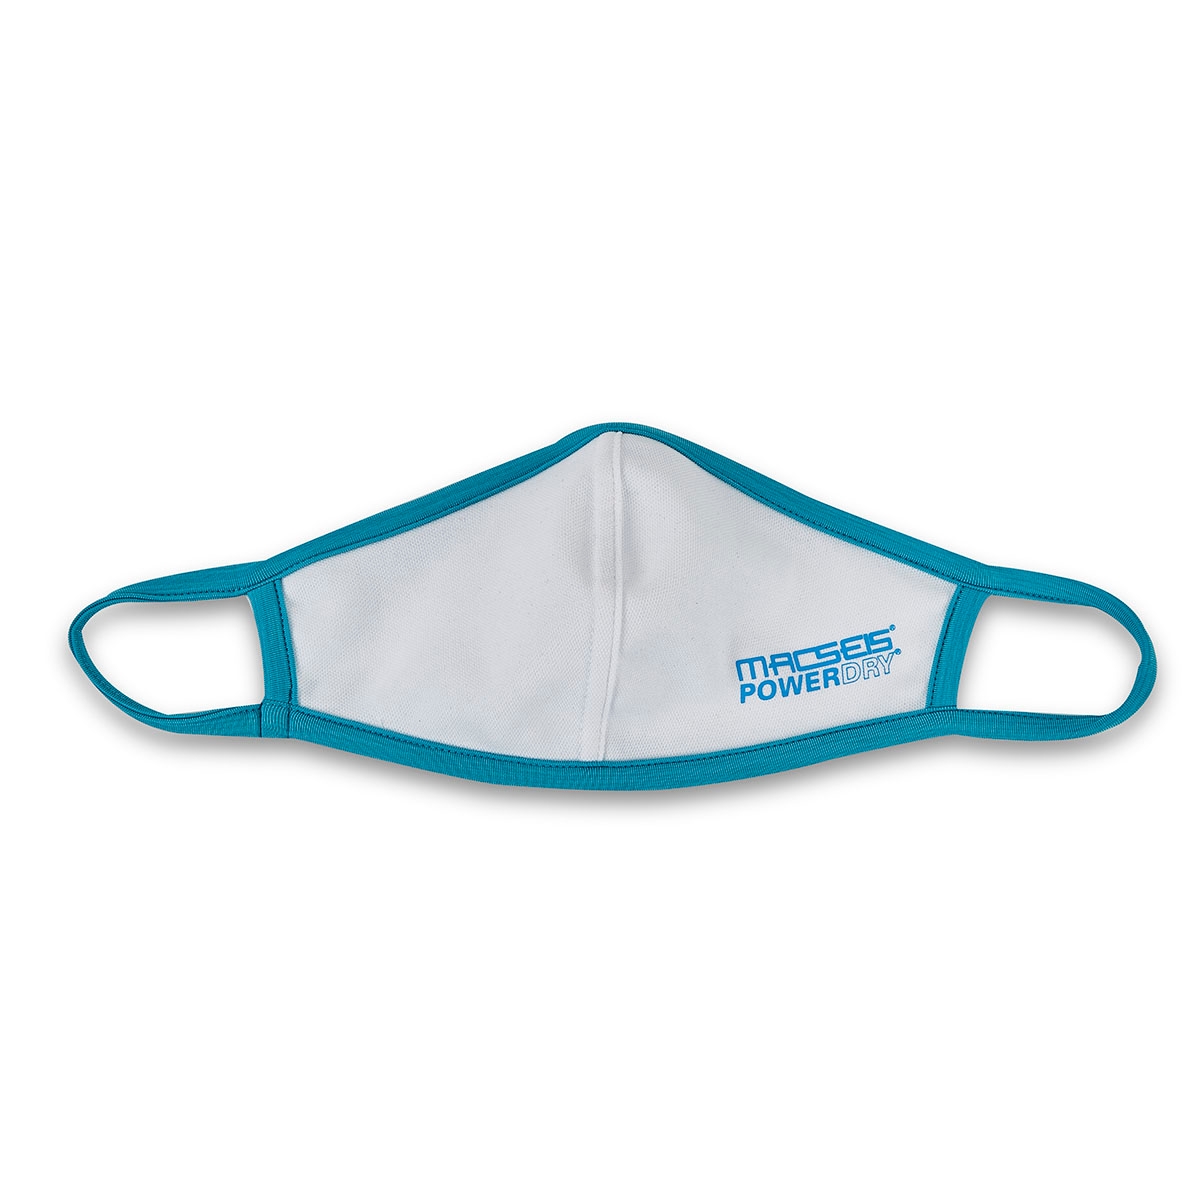 Unisex Macseis PowerDry Mask -Wht/Turquoise Small